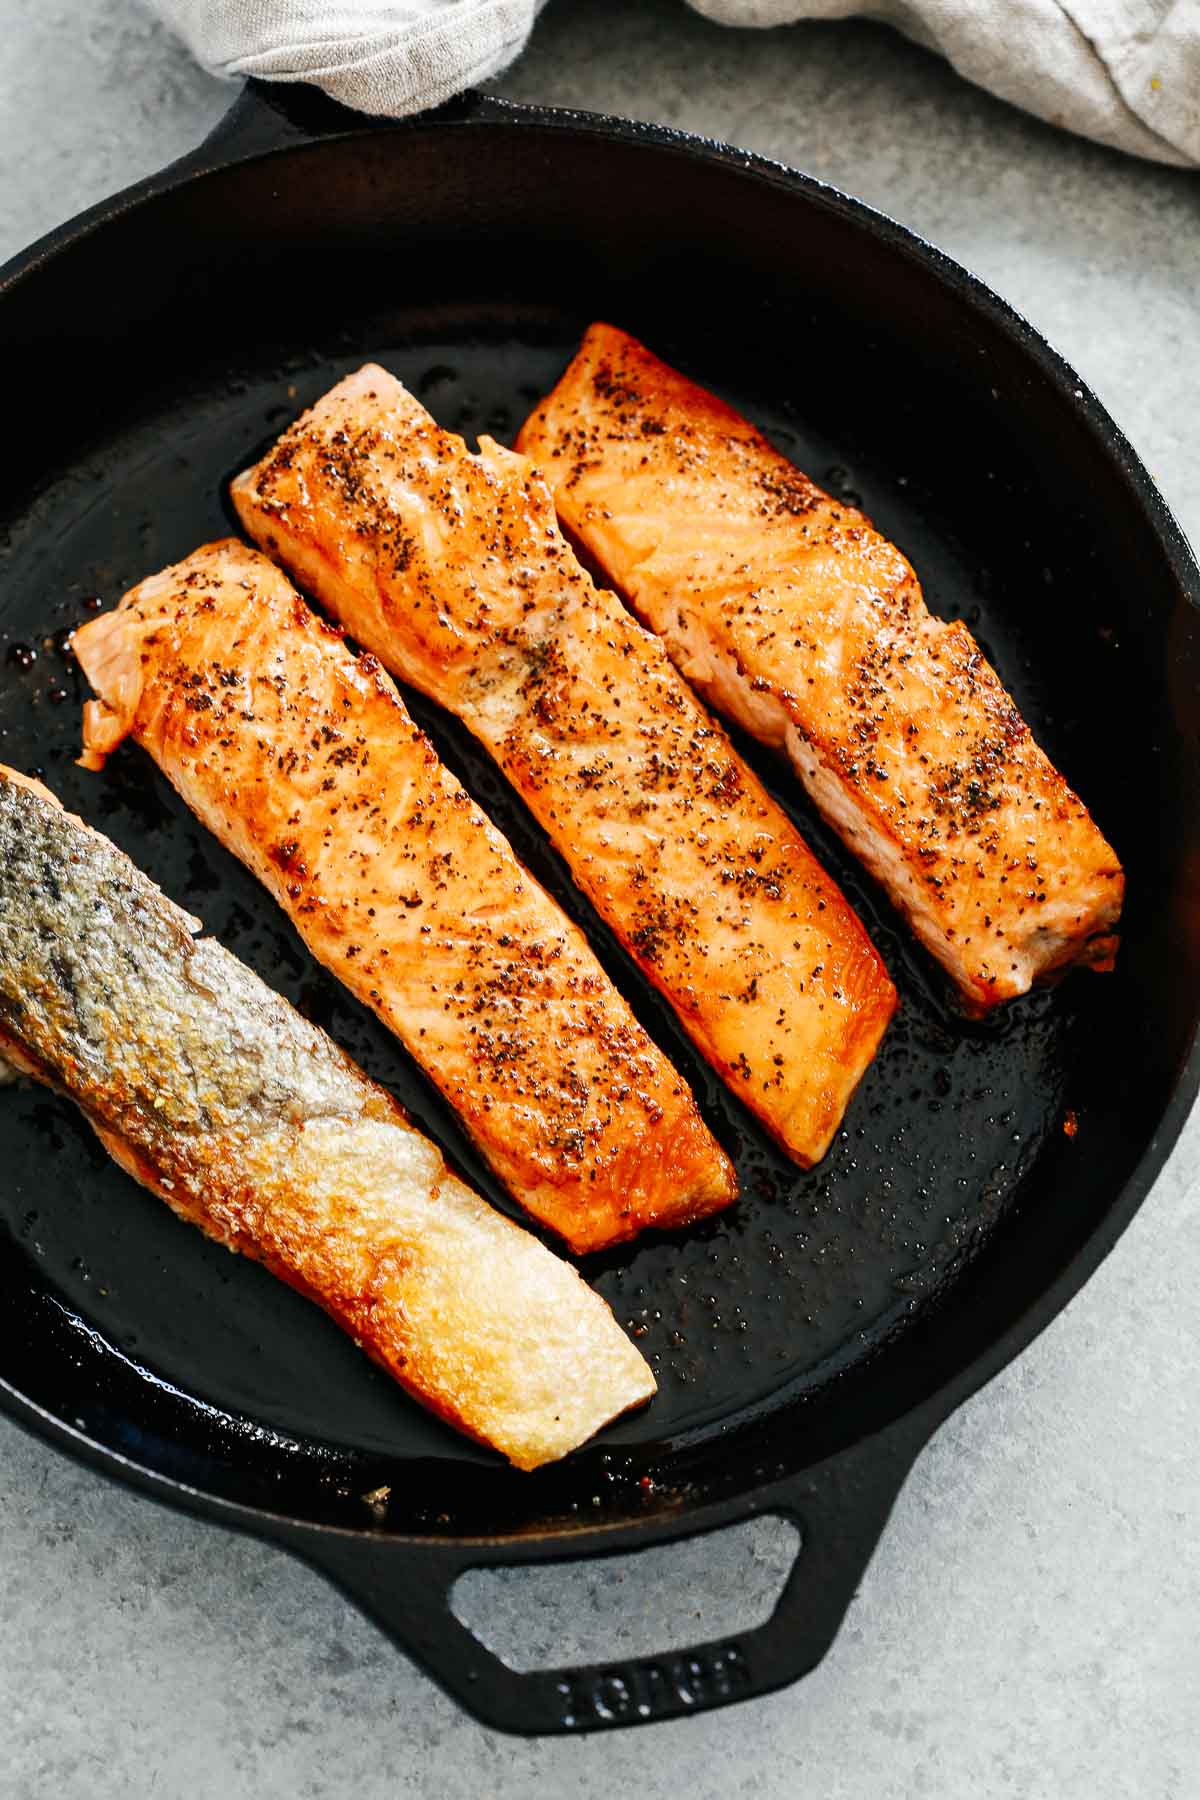 4 pieces of fish in black iron skillet